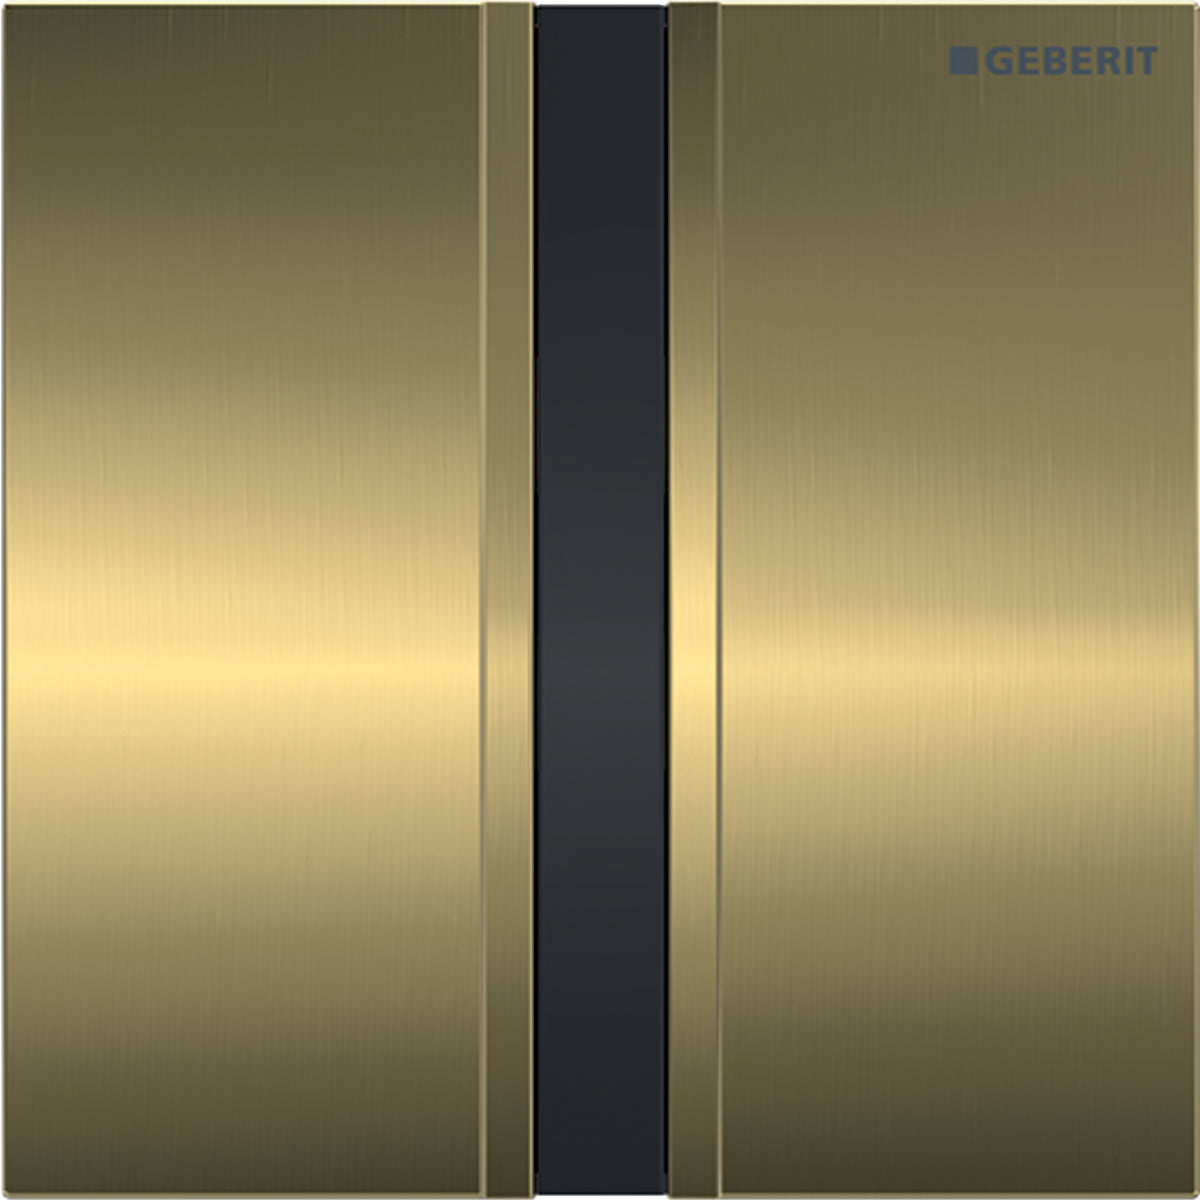 Geberit 116.036.QF.1- Geberit urinal flush control with electronic flush actuation, battery operation, cover plate type 50: brass / brushed, easy-to-clean coated - FaucetExpress.ca